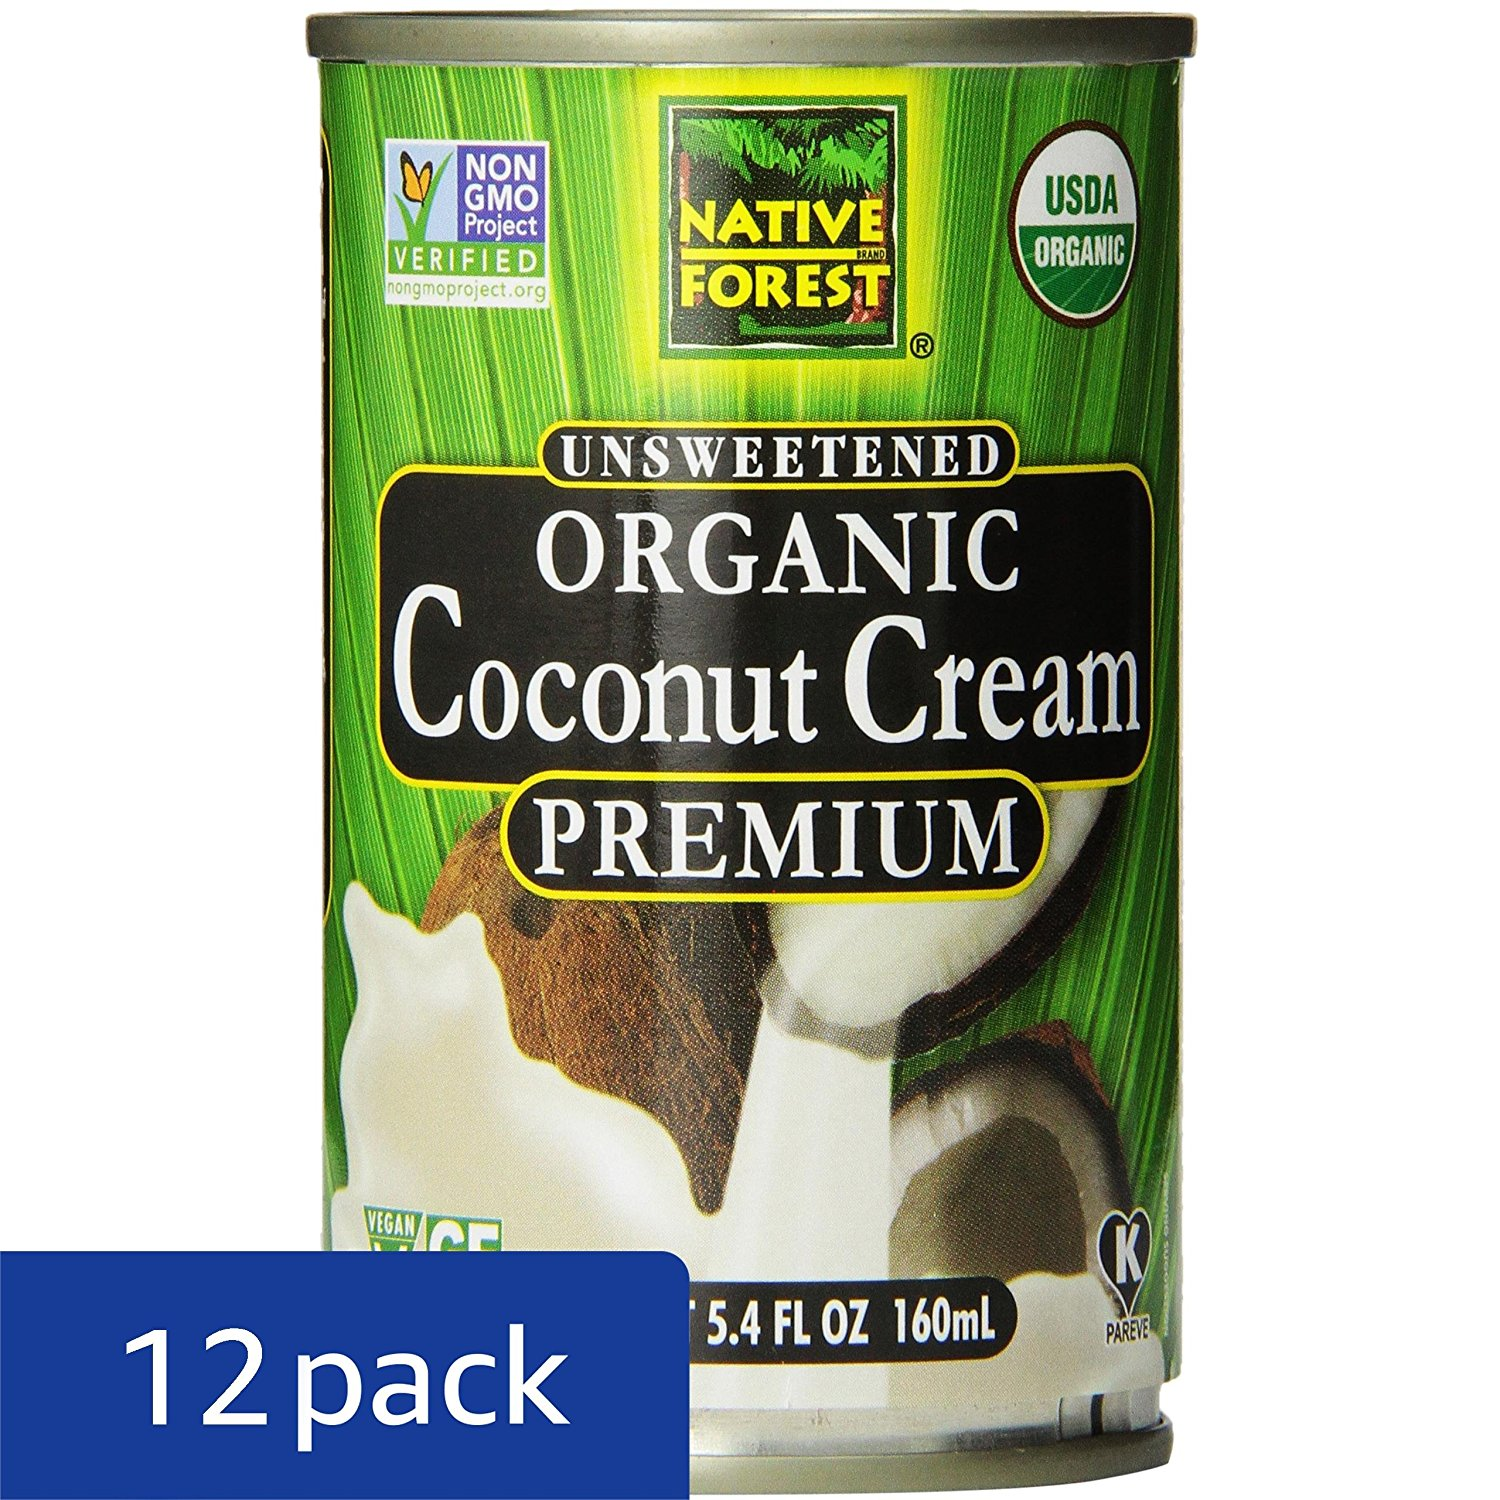 Native Forest Organic Premium Coconut Cream (Unsweetened) Pack of 12 Only $8.49 Shipped!